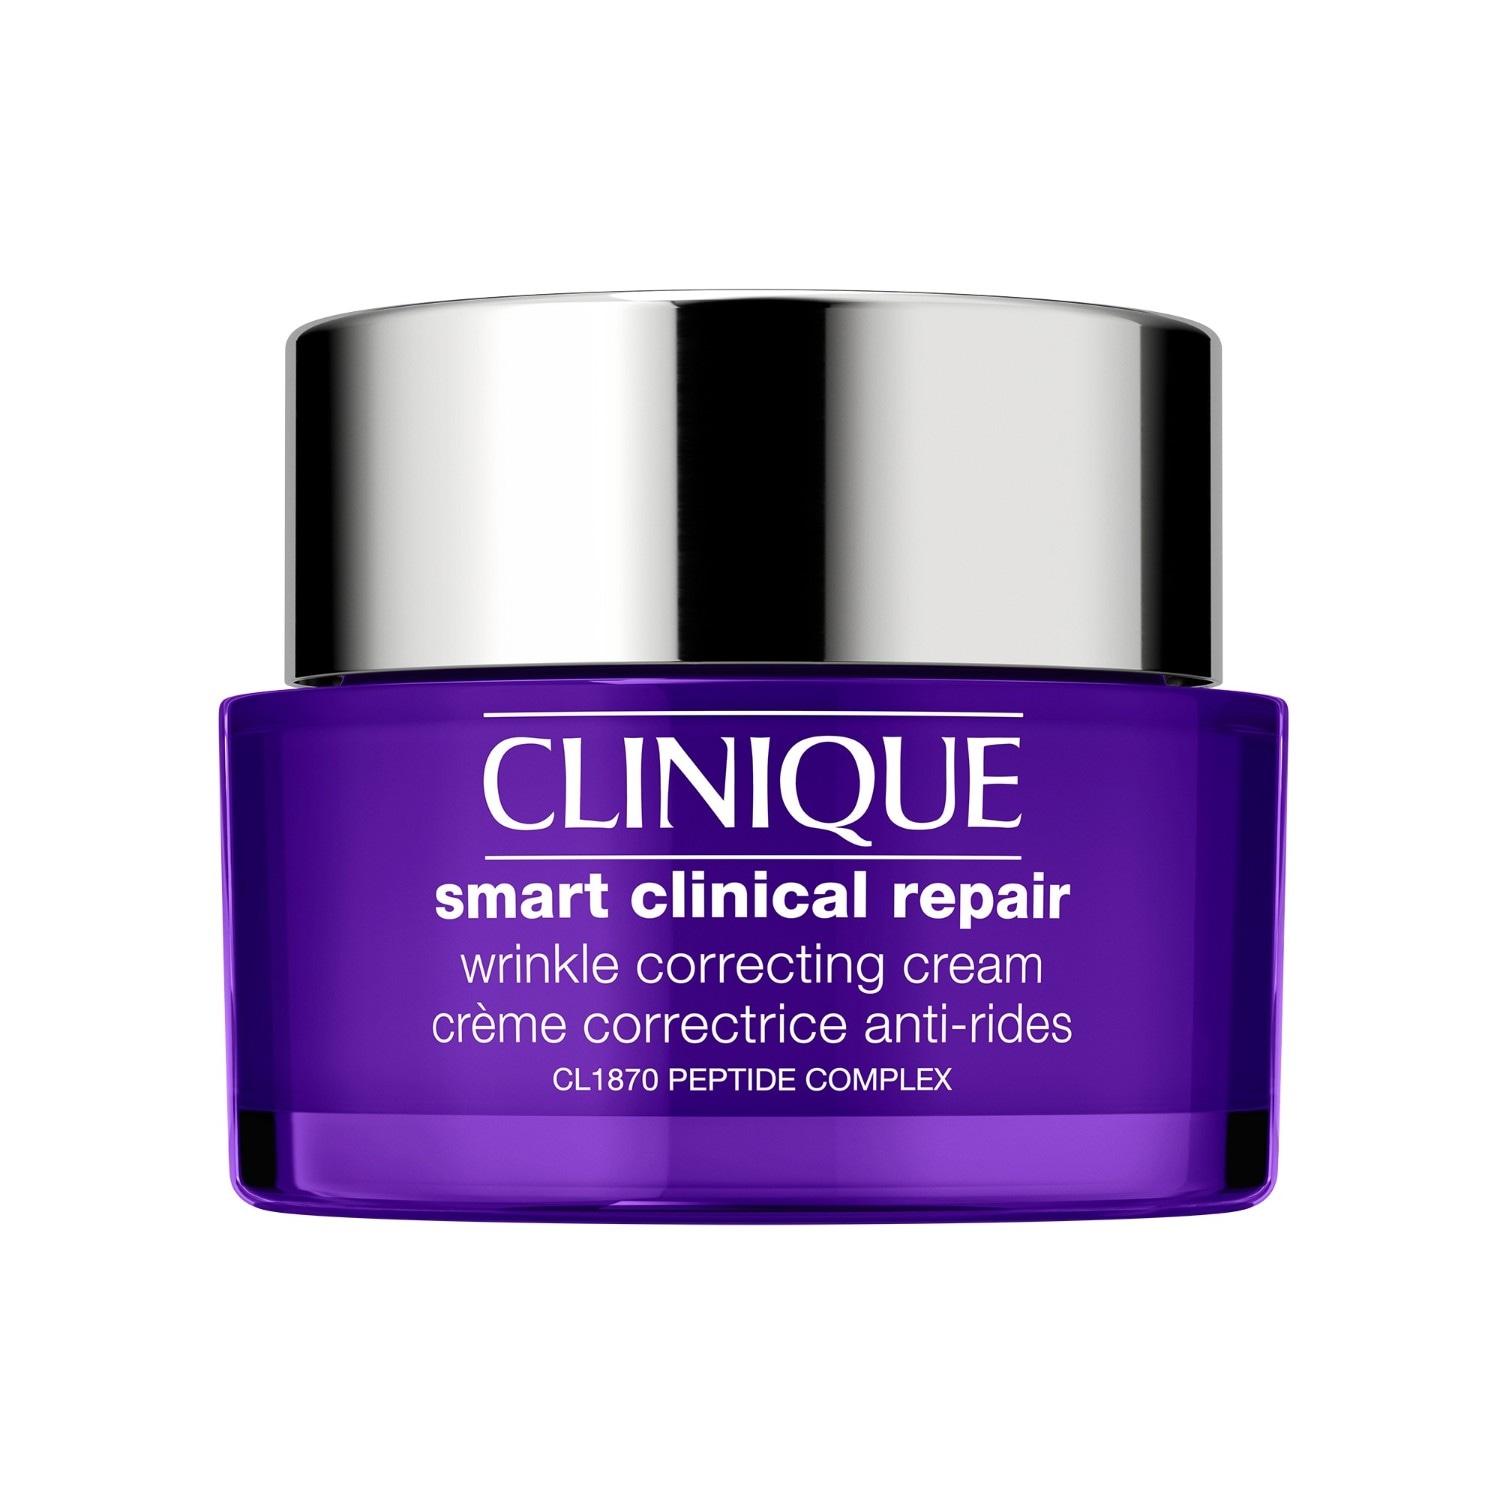 Clinique Smart Clinical Repair ™ Wrinkle Correcting Cream